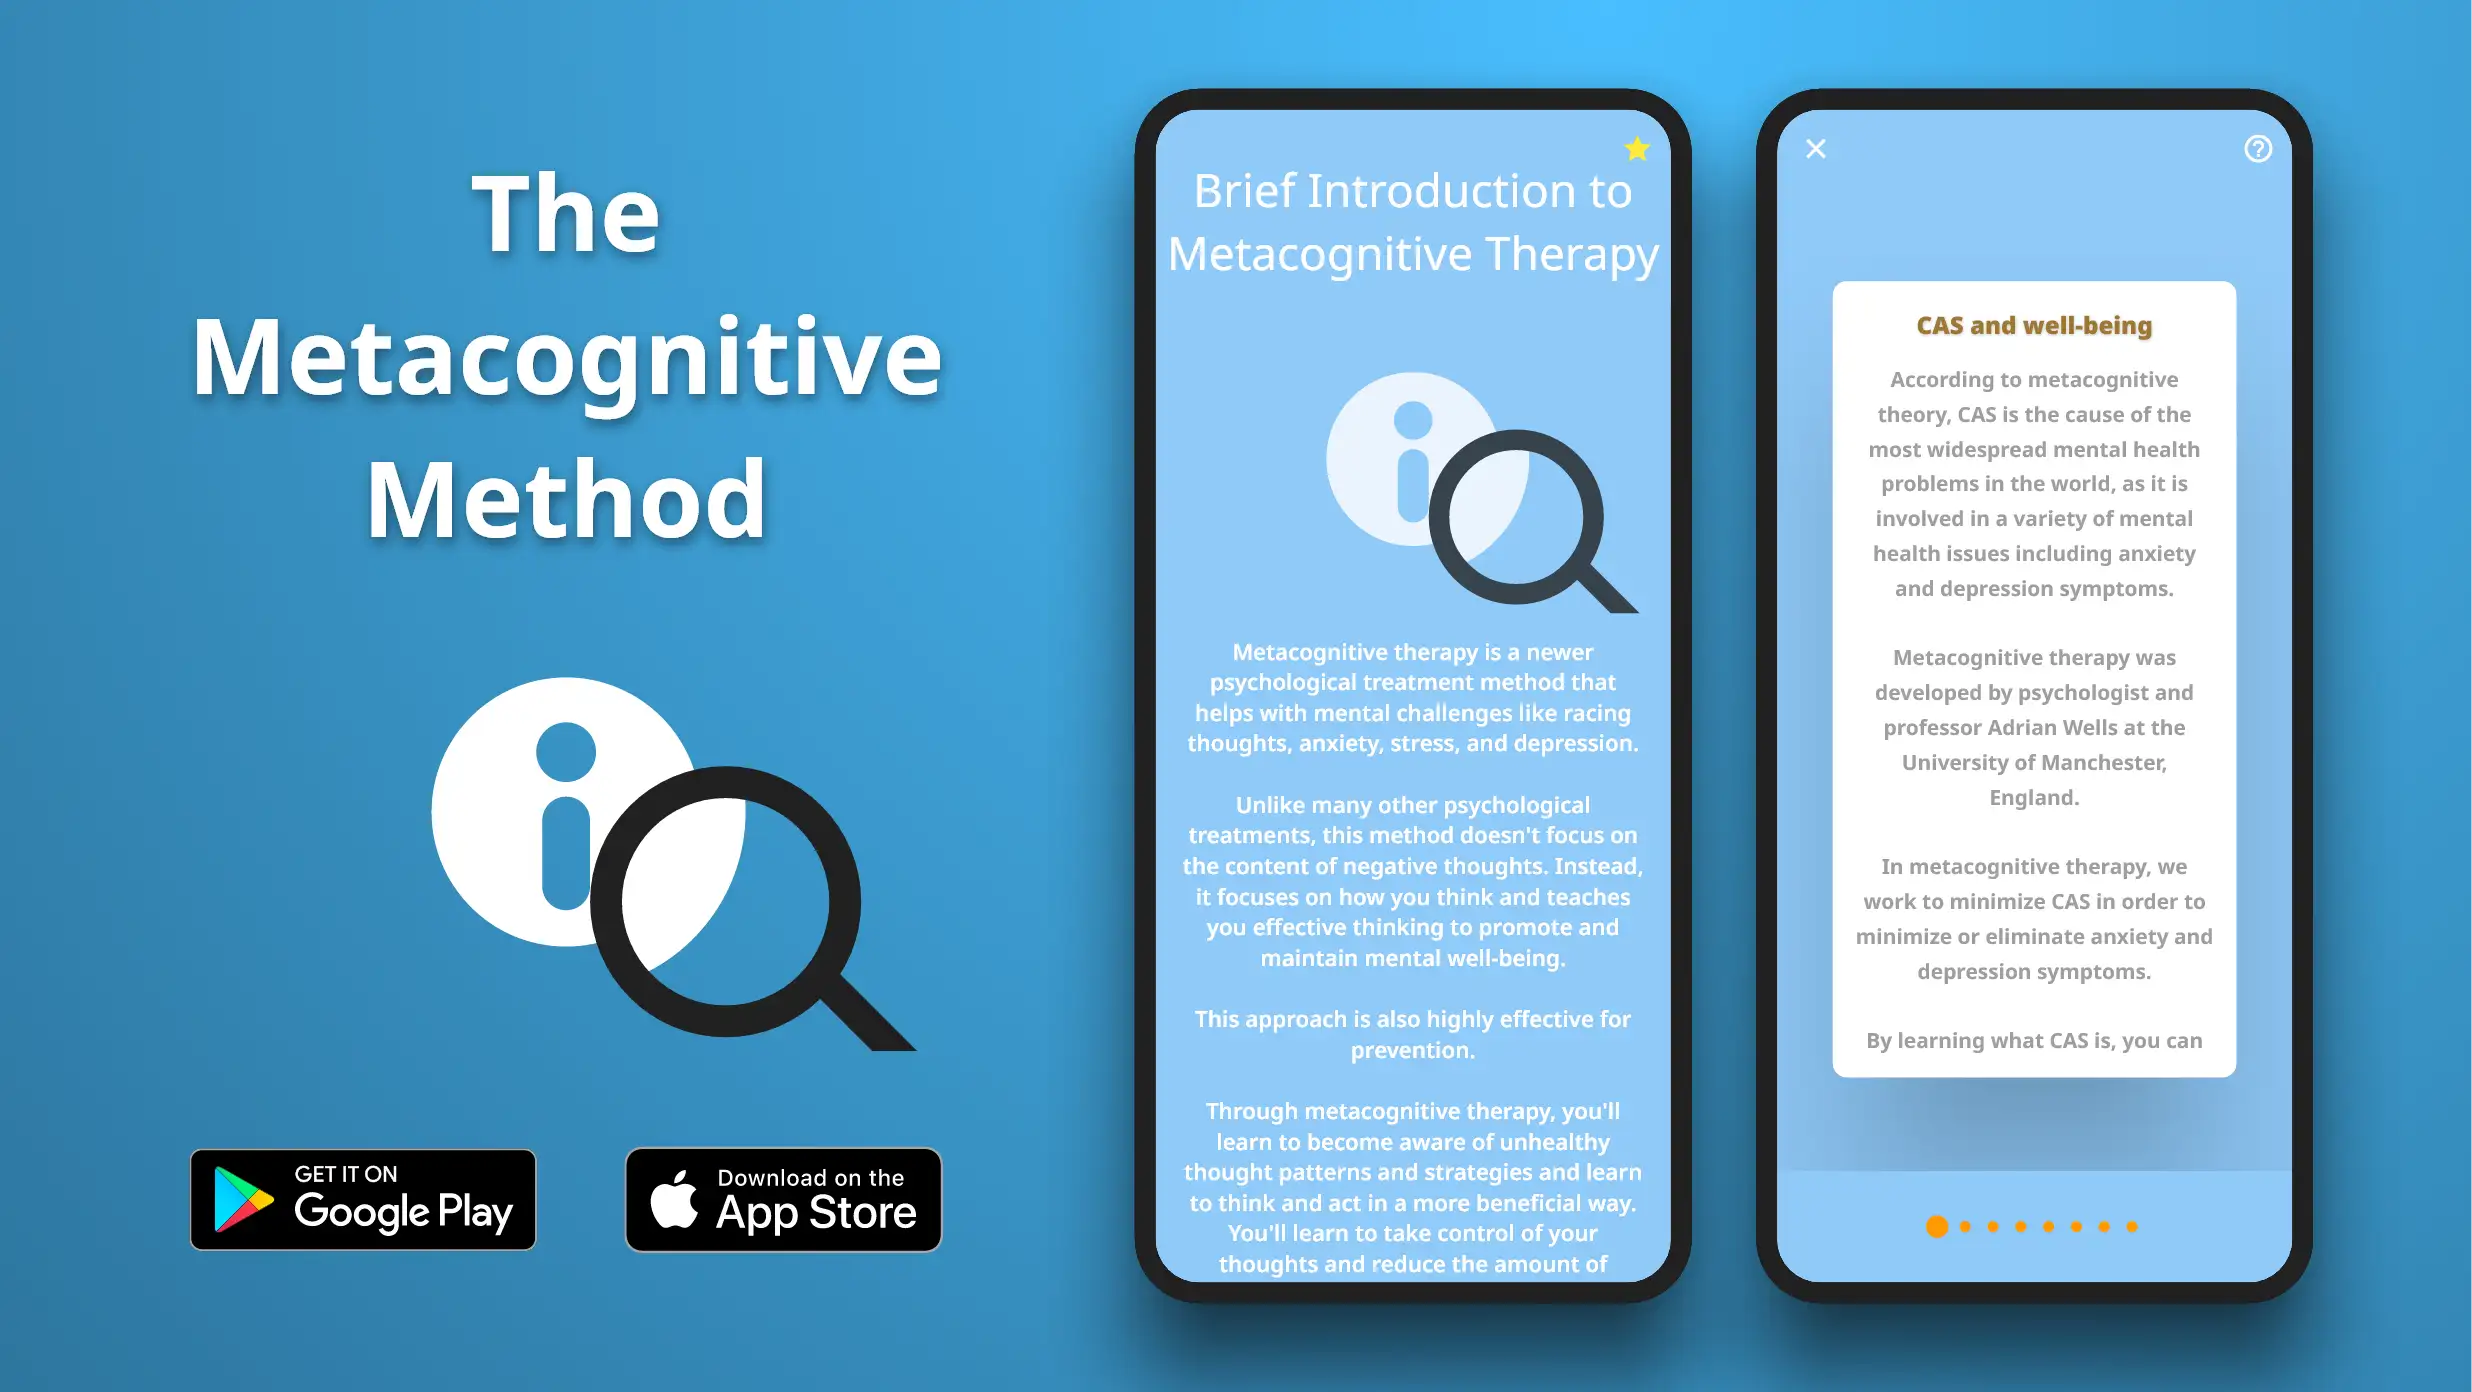 The metacognitive method exercise in the Meta Learn app.